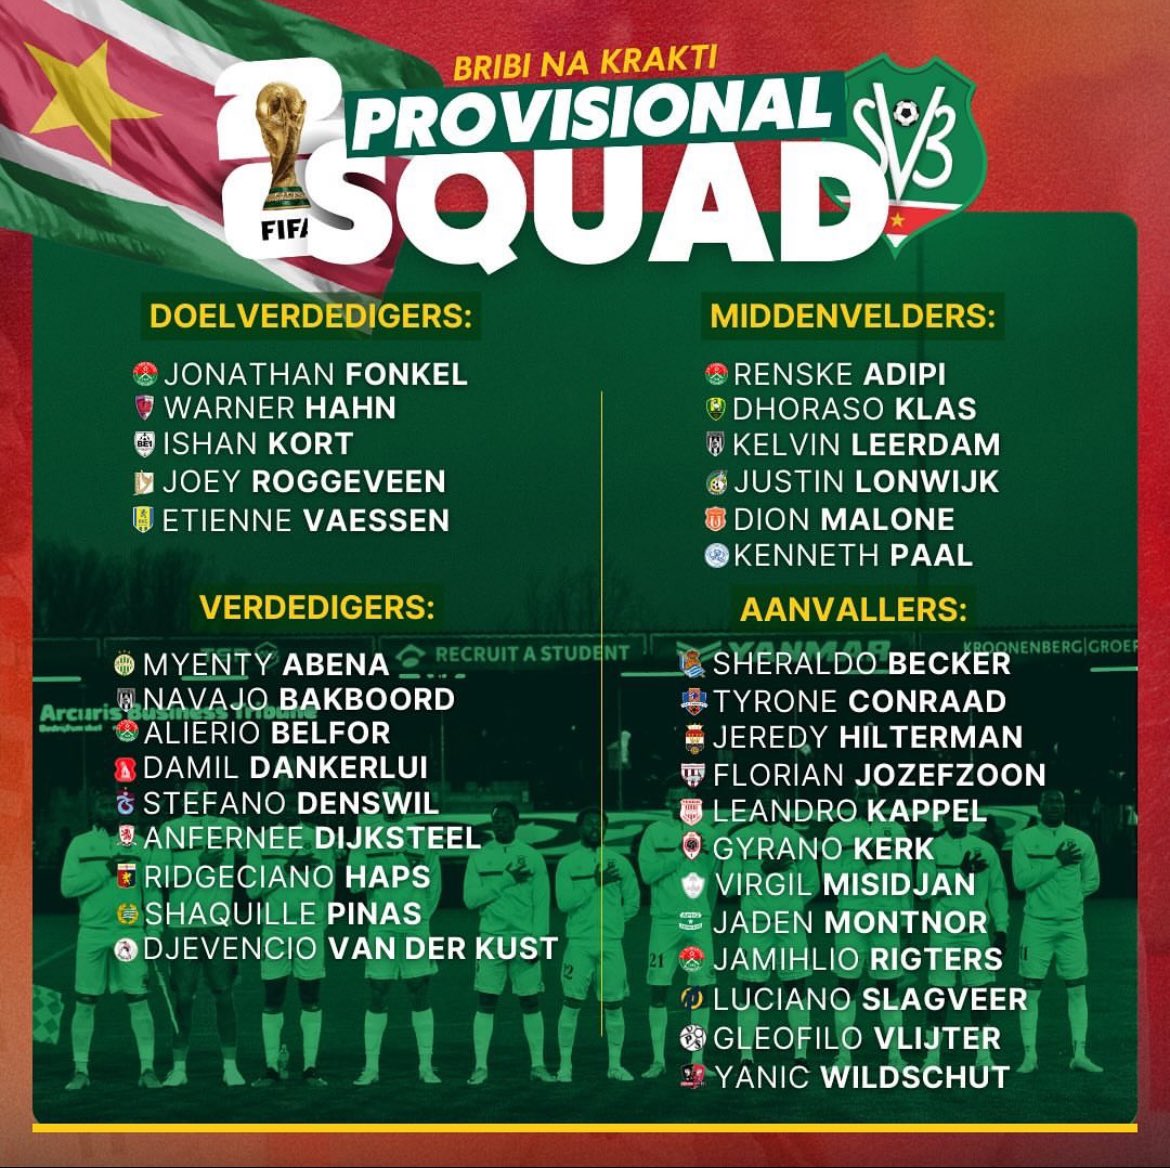 A strong provisional squad for Suriname 🇸🇷 has been named as they start World Cup Qualifying in June!

🆕 Etienne Vaessen (RKC Waalwijk 🇳🇱)
🆕 Gyrano Kerk (Antwerp 🇧🇪)

Two huge additions. Starting Eredivisie keeper and Kerk scored yesterday. 👏